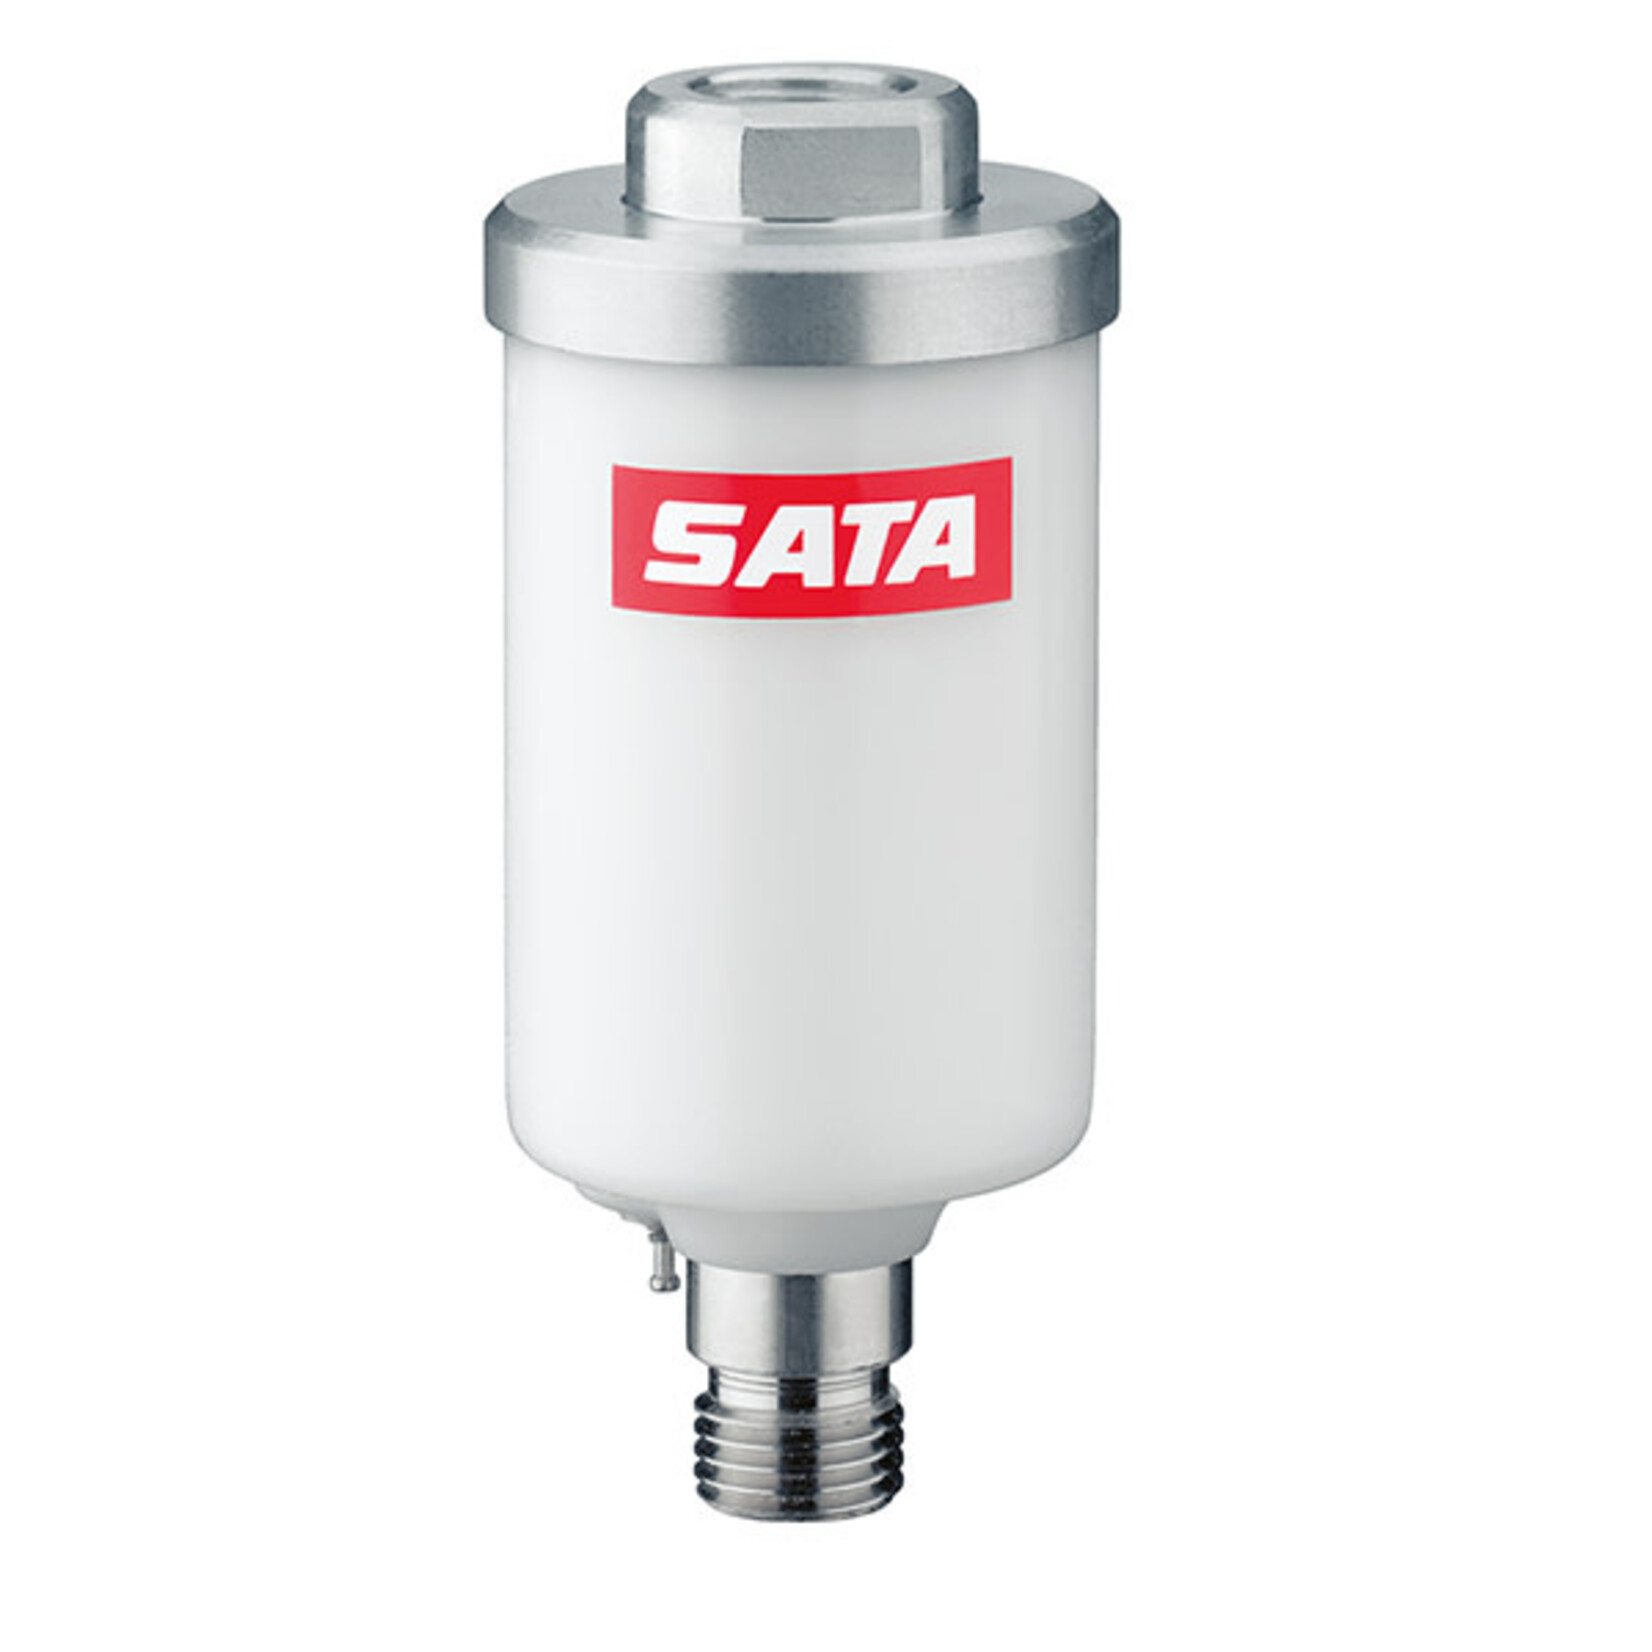 SATA SATA® MINI FILTER 1/4″ (MALE THREAD) Dust, oil, and condensate are removed from the spraying air directly at the spray gun